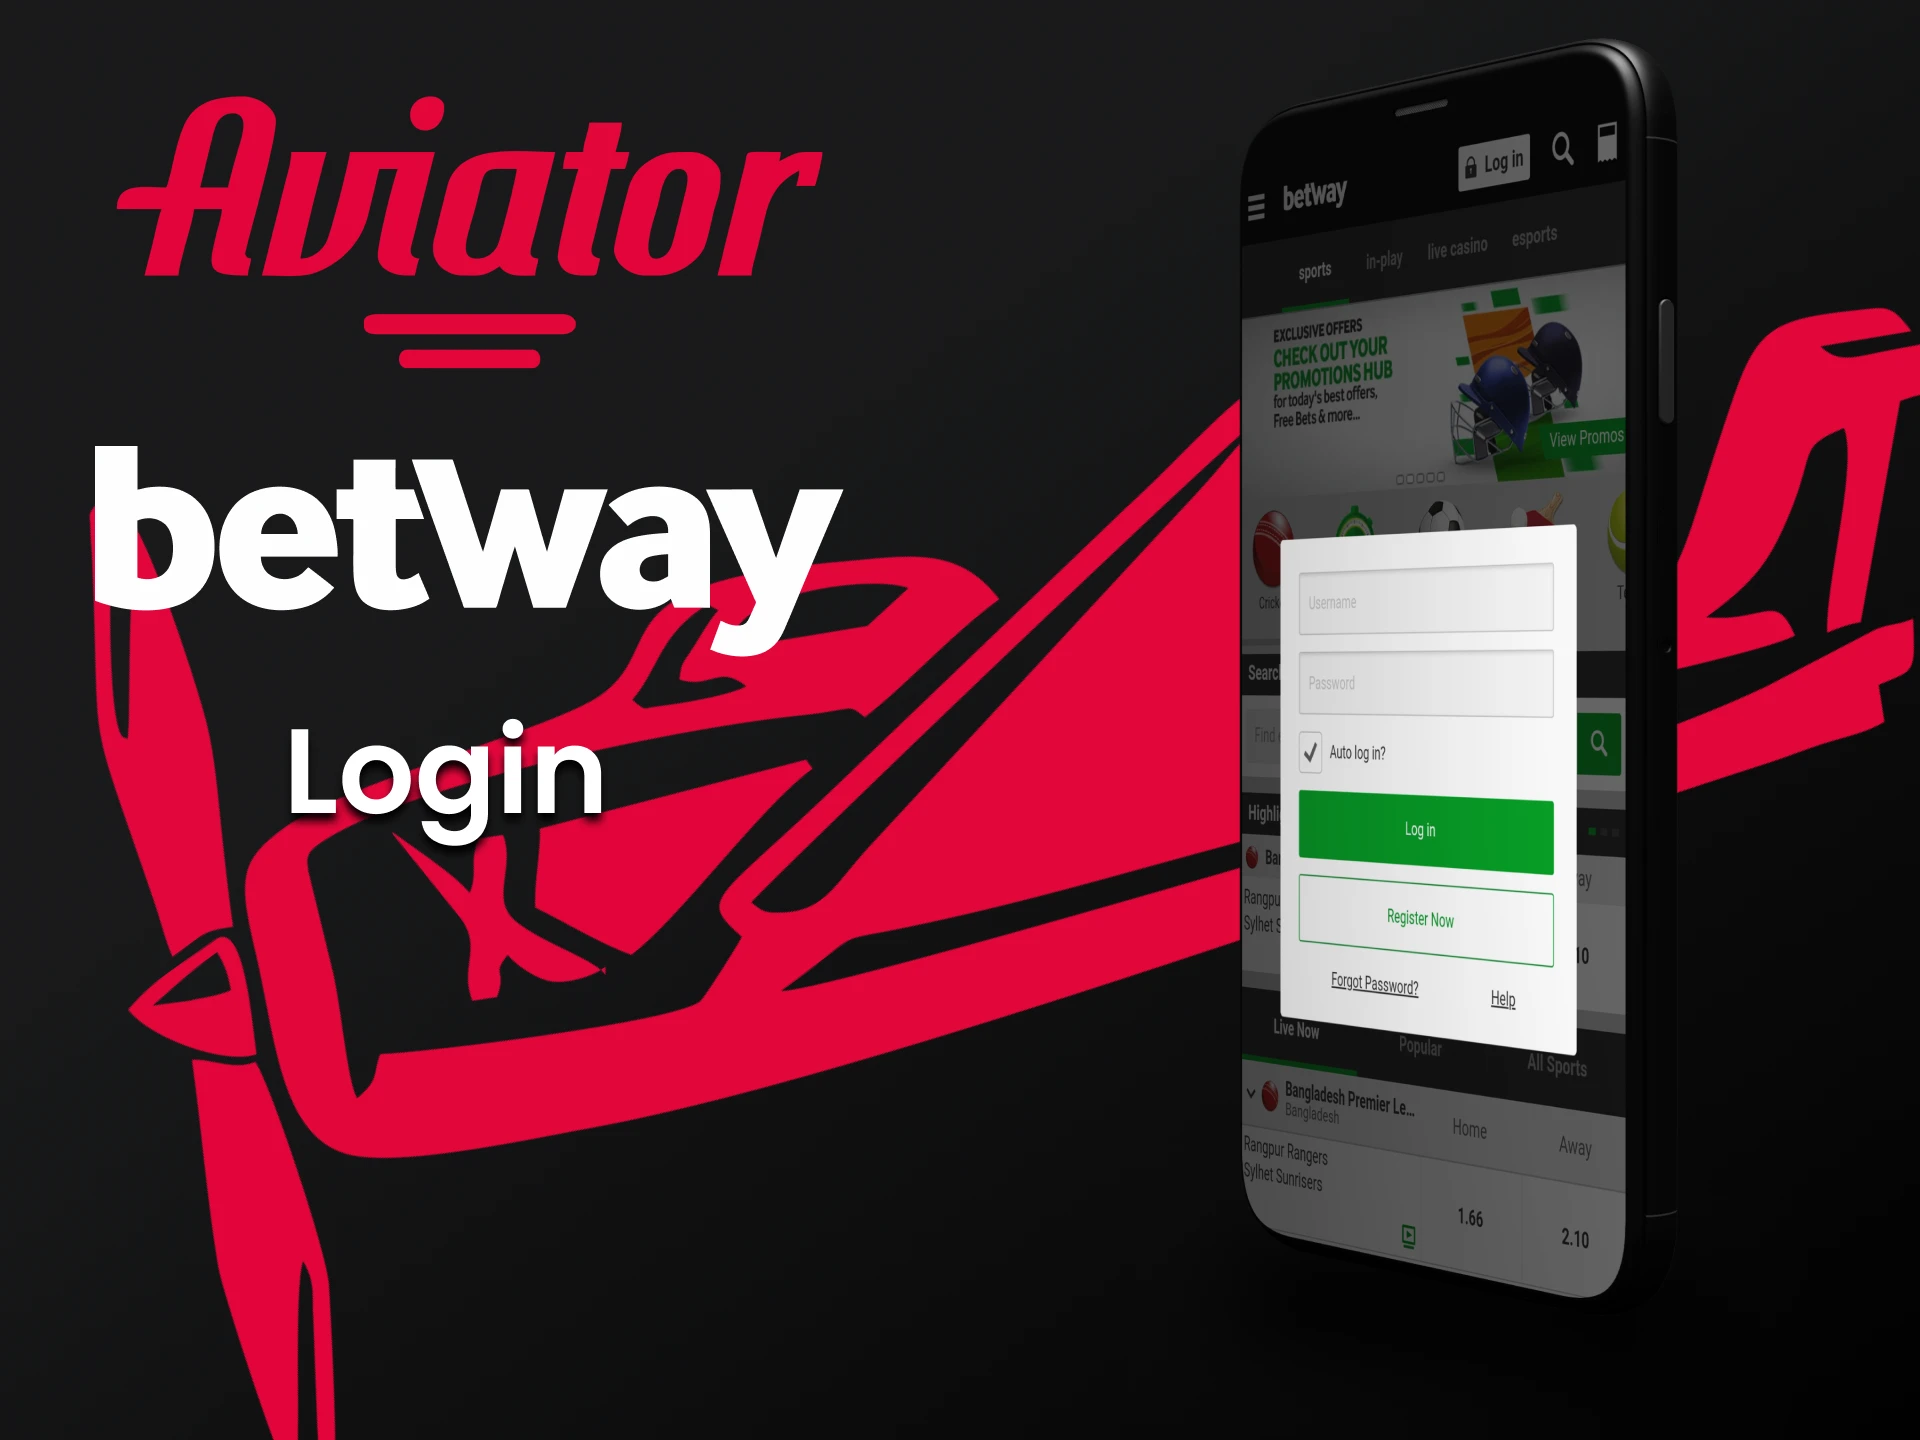 To start playing Aviator on Betway, log in to your account.